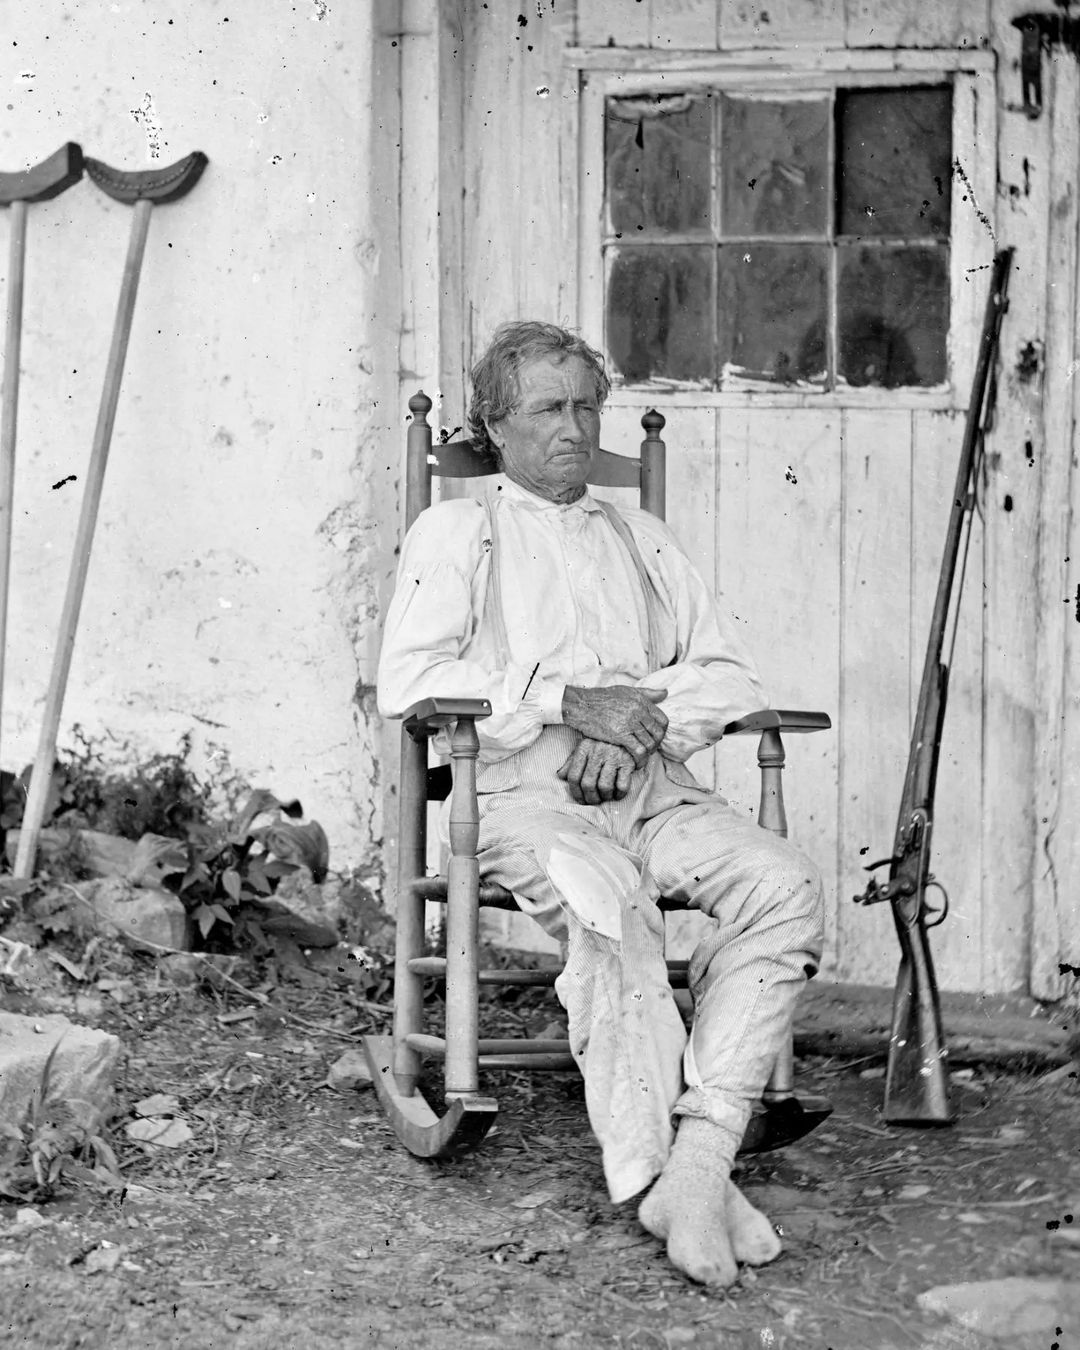 John Lawrence Burns, Veteran Of The War Of 1812, Became A 69-Year-Old Civilian Combatant With The Union Army At The Battle Of Gettysburg During The American Civil War. He Fought Valiantly For 3 Days During The Battle, Being Wounded Three Time, And Survived To Become A National Celebrity. Photo By Timothy O’sullivan In The 1860s